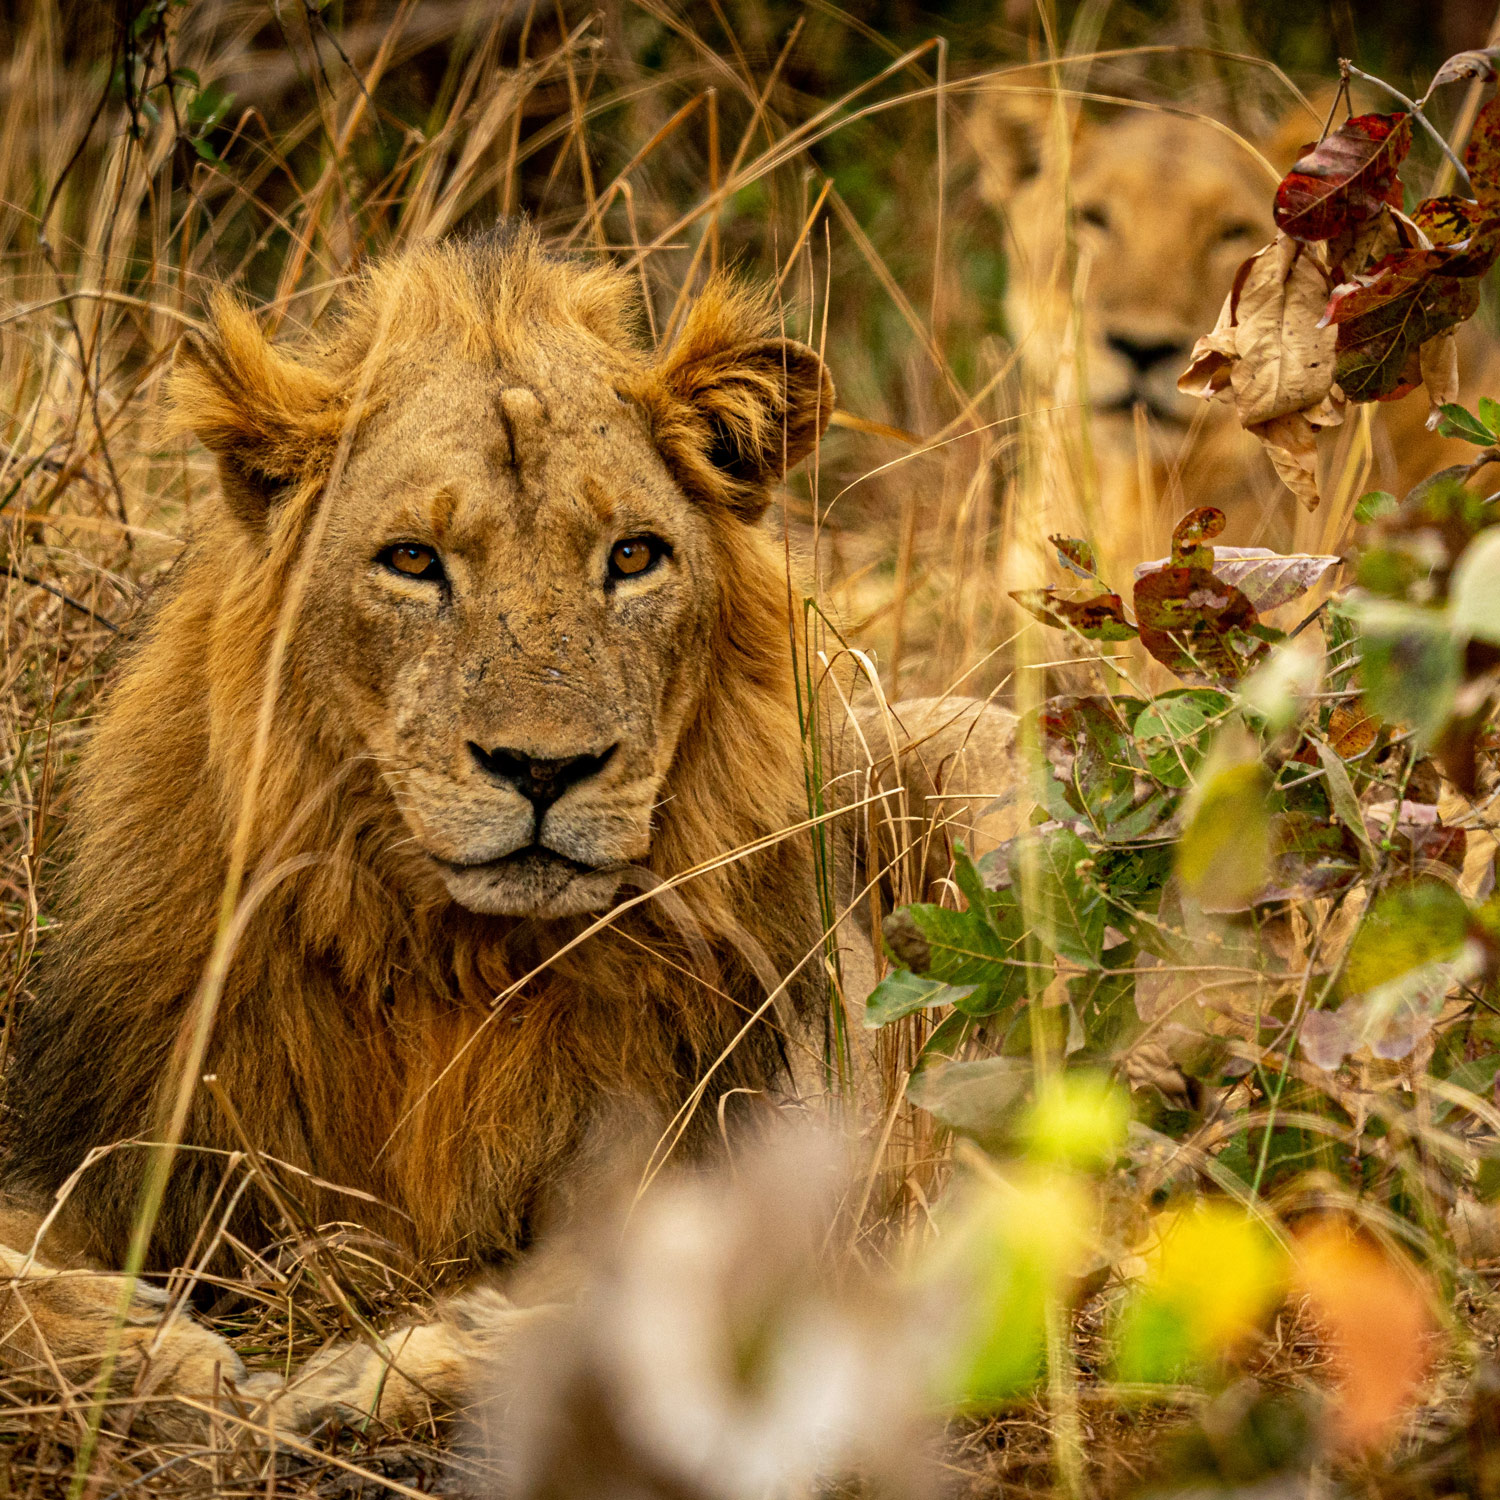 Luambe National Park: Protecting the species of lions